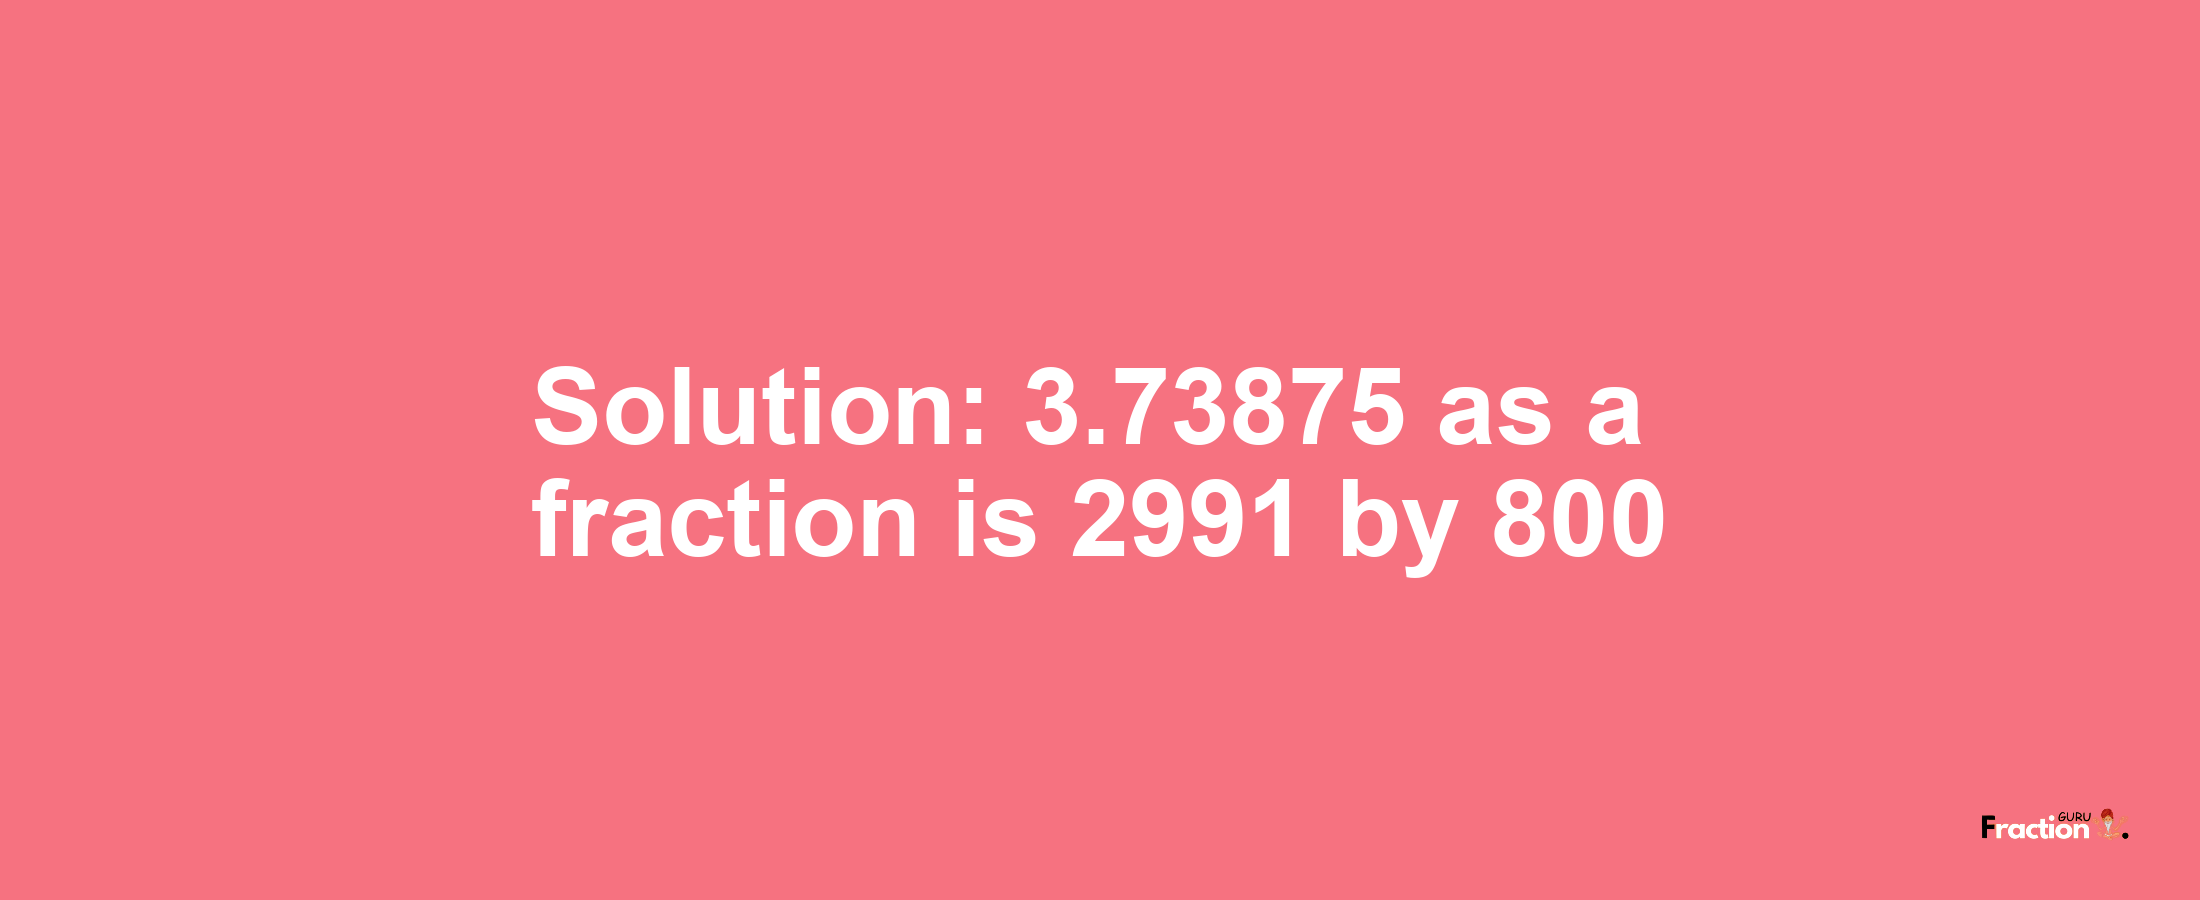 Solution:3.73875 as a fraction is 2991/800